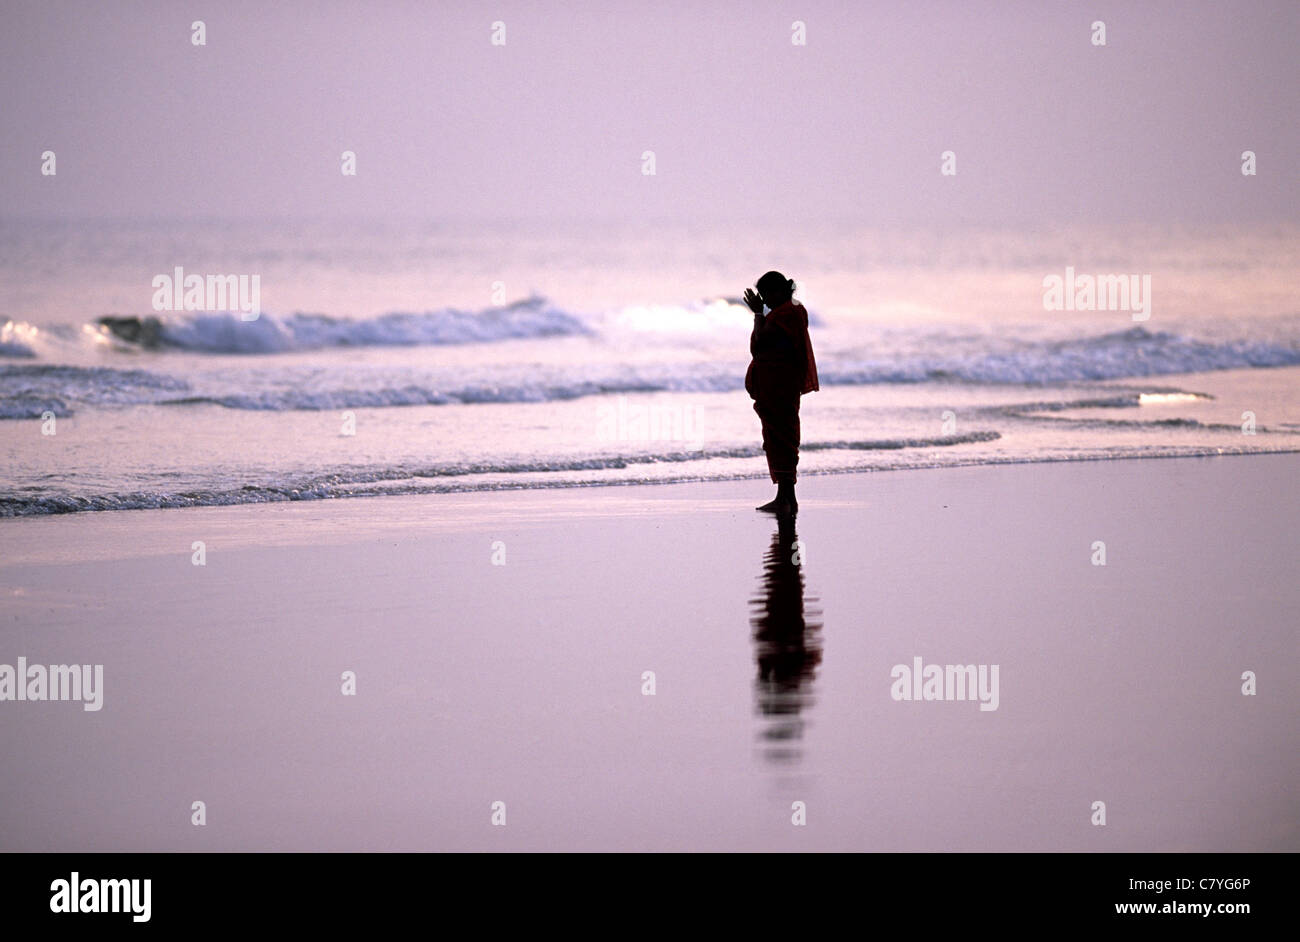 Pregnant woman on beach at sunset Stock Photo